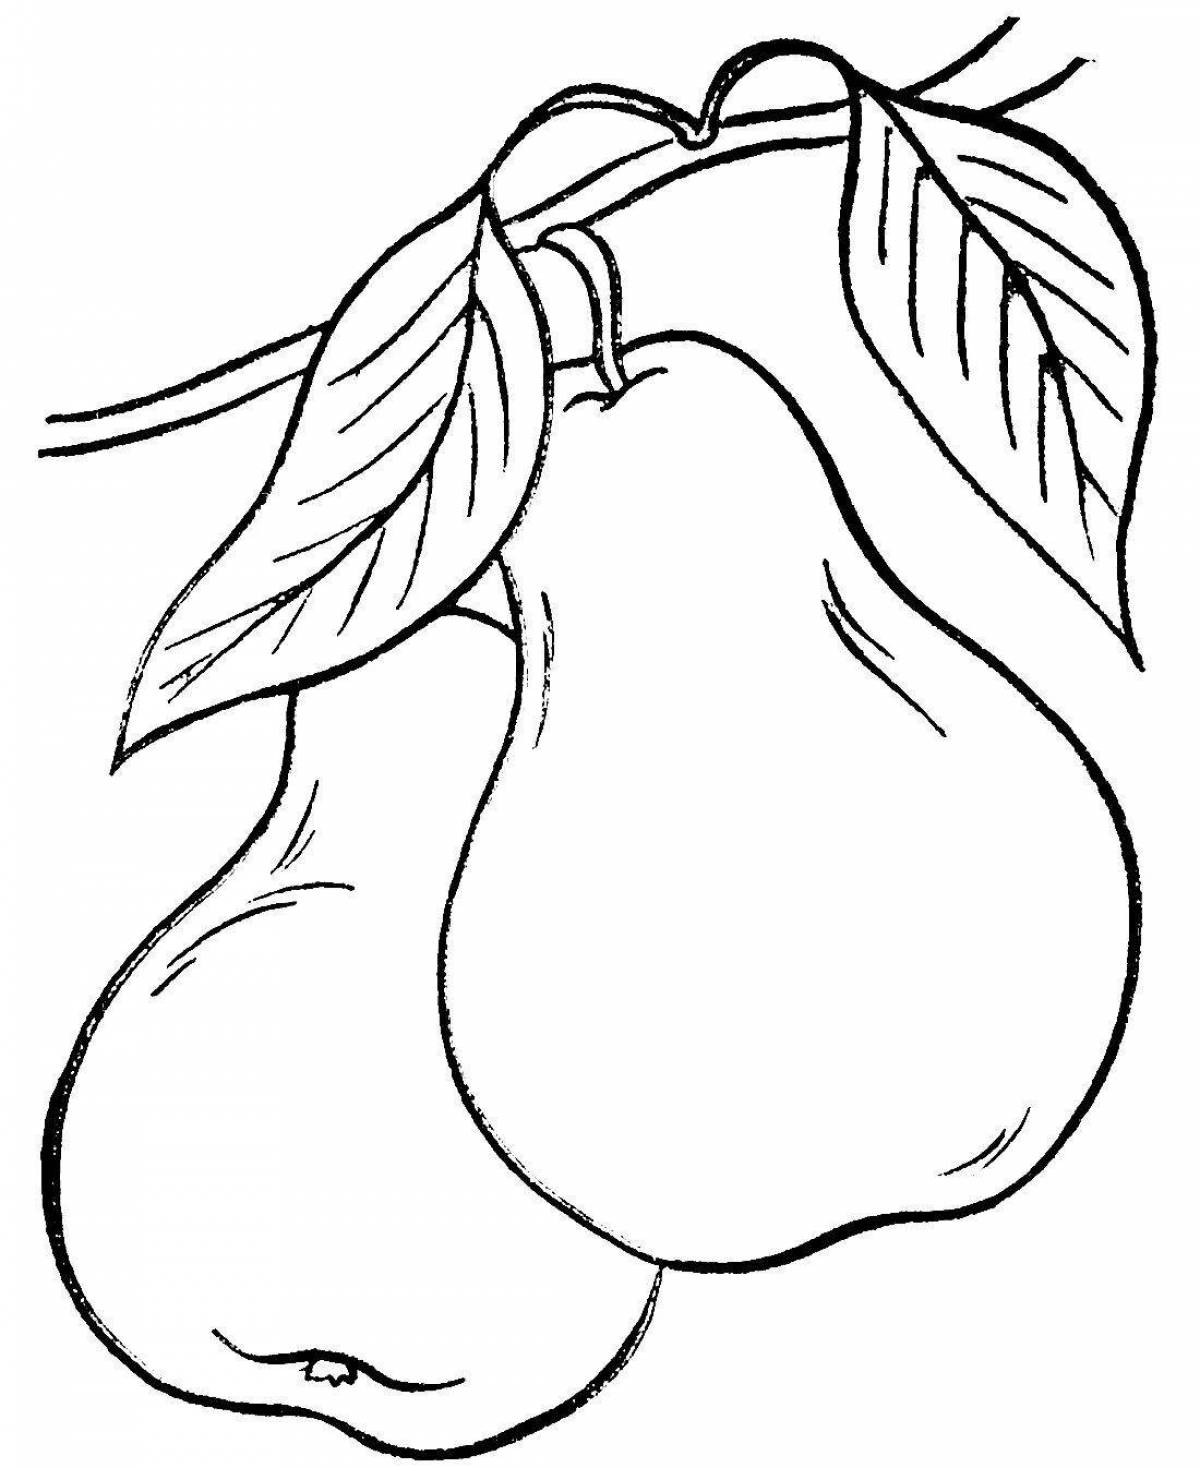 Animated pear coloring book for children 3-4 years old